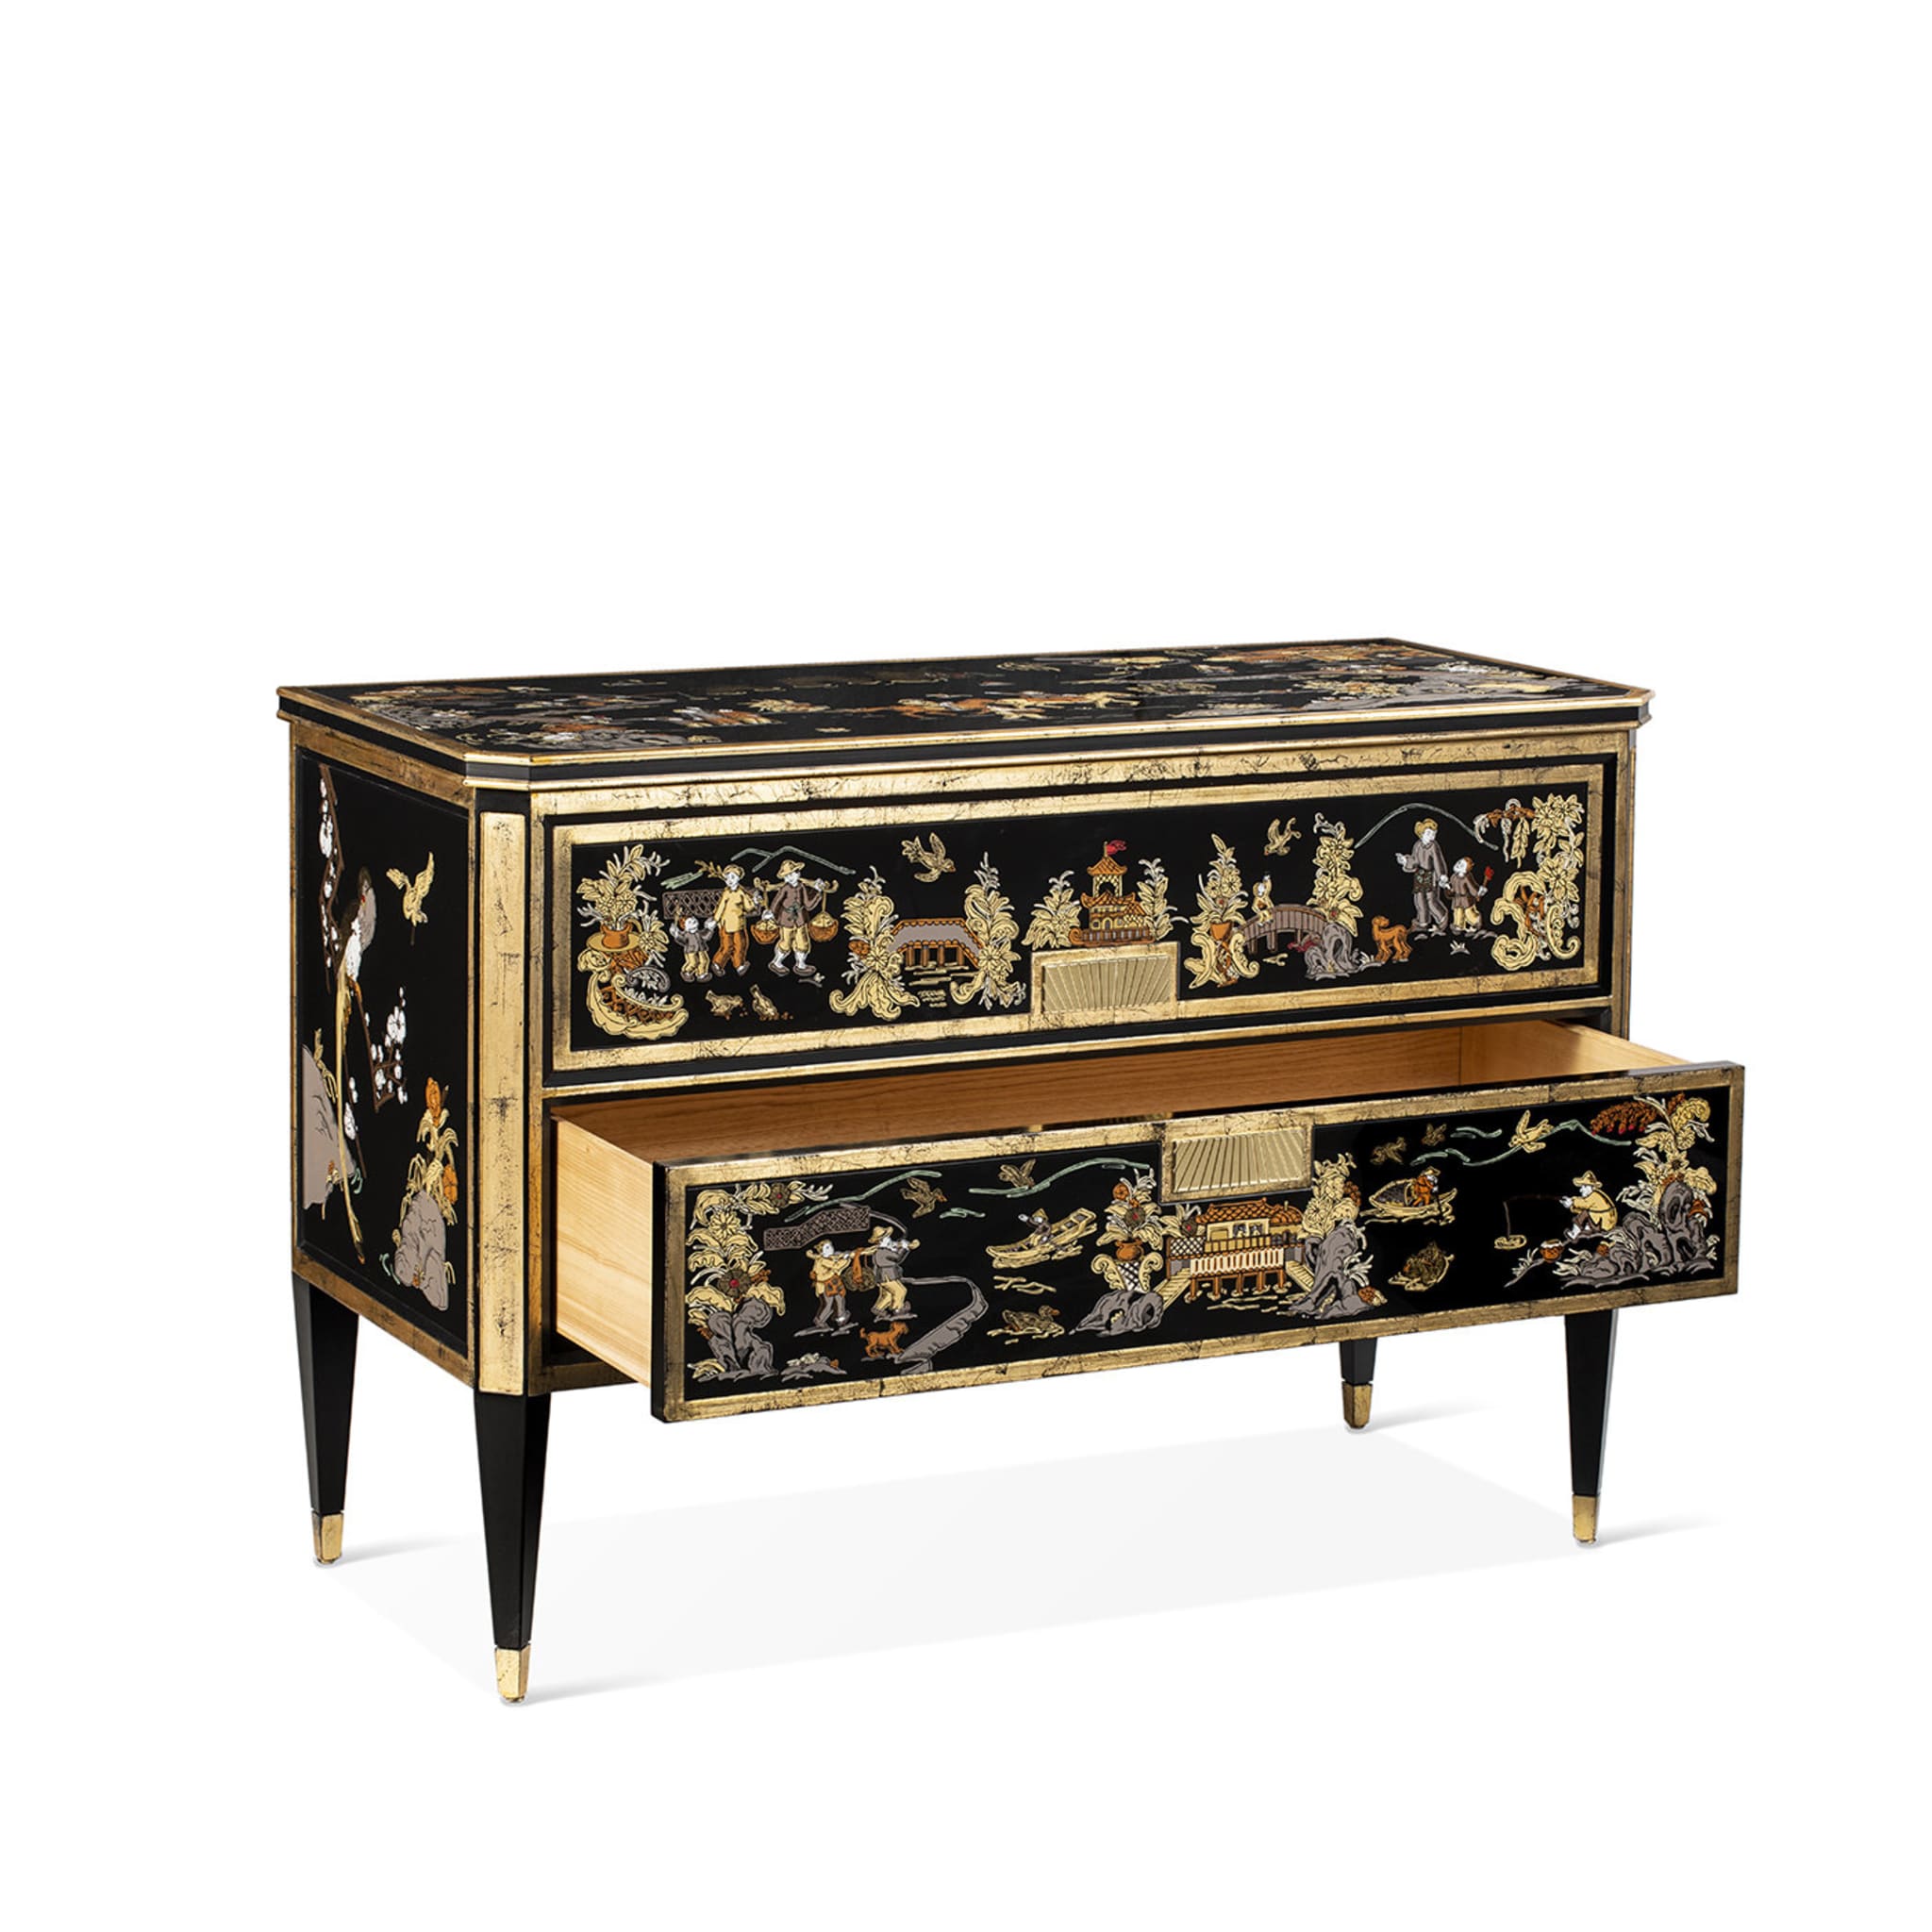 Louis XVI dresser with Hand-Painted Decorations 8708 - Alternative view 2